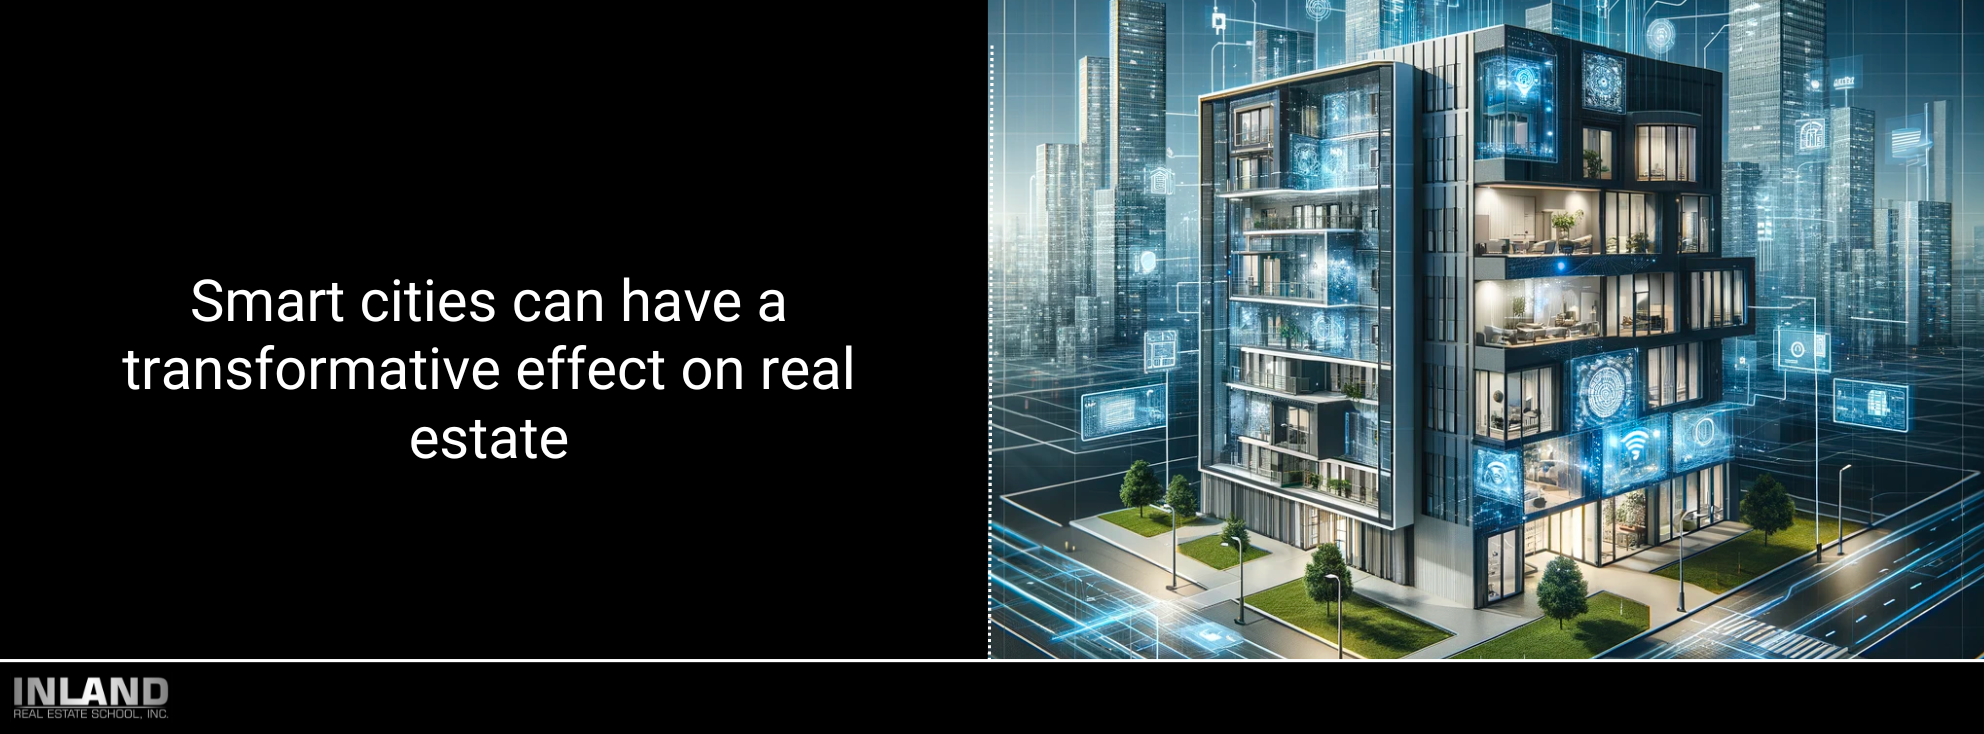 Digital graphic of a modern building with smart home technologies, representing the future of real estate in smart cities.